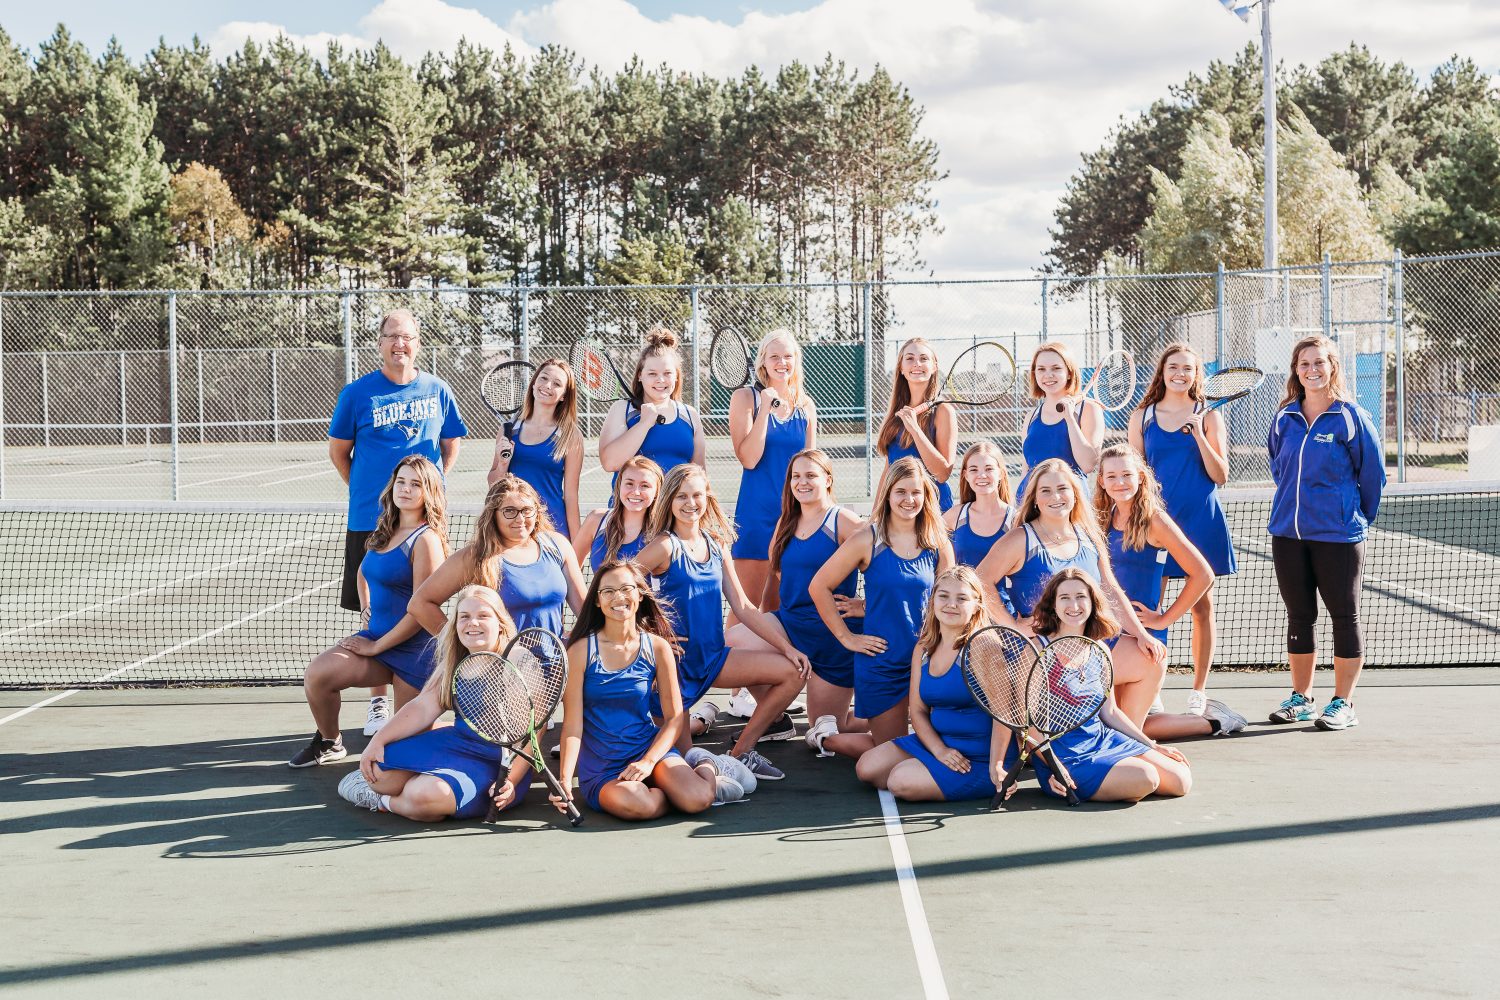 Bluejay tennis turns in strong season finale over Evergreens